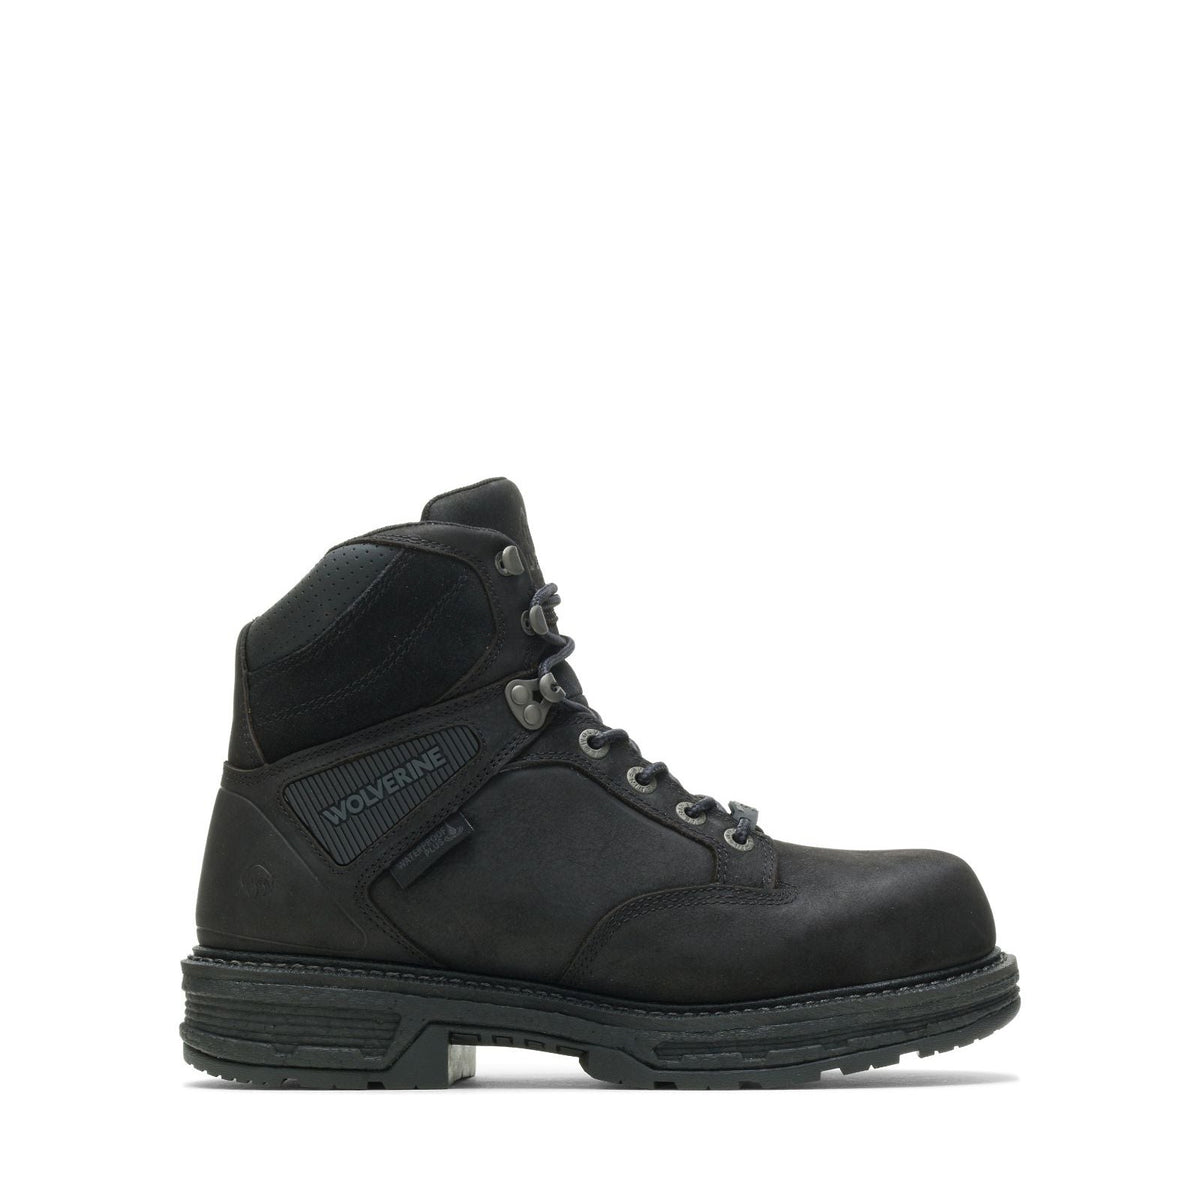 Buy Online Premium Quality WOLV 6" BLK W/P HELLCAT | Best Safety Shoes and Boots - Shoeworks